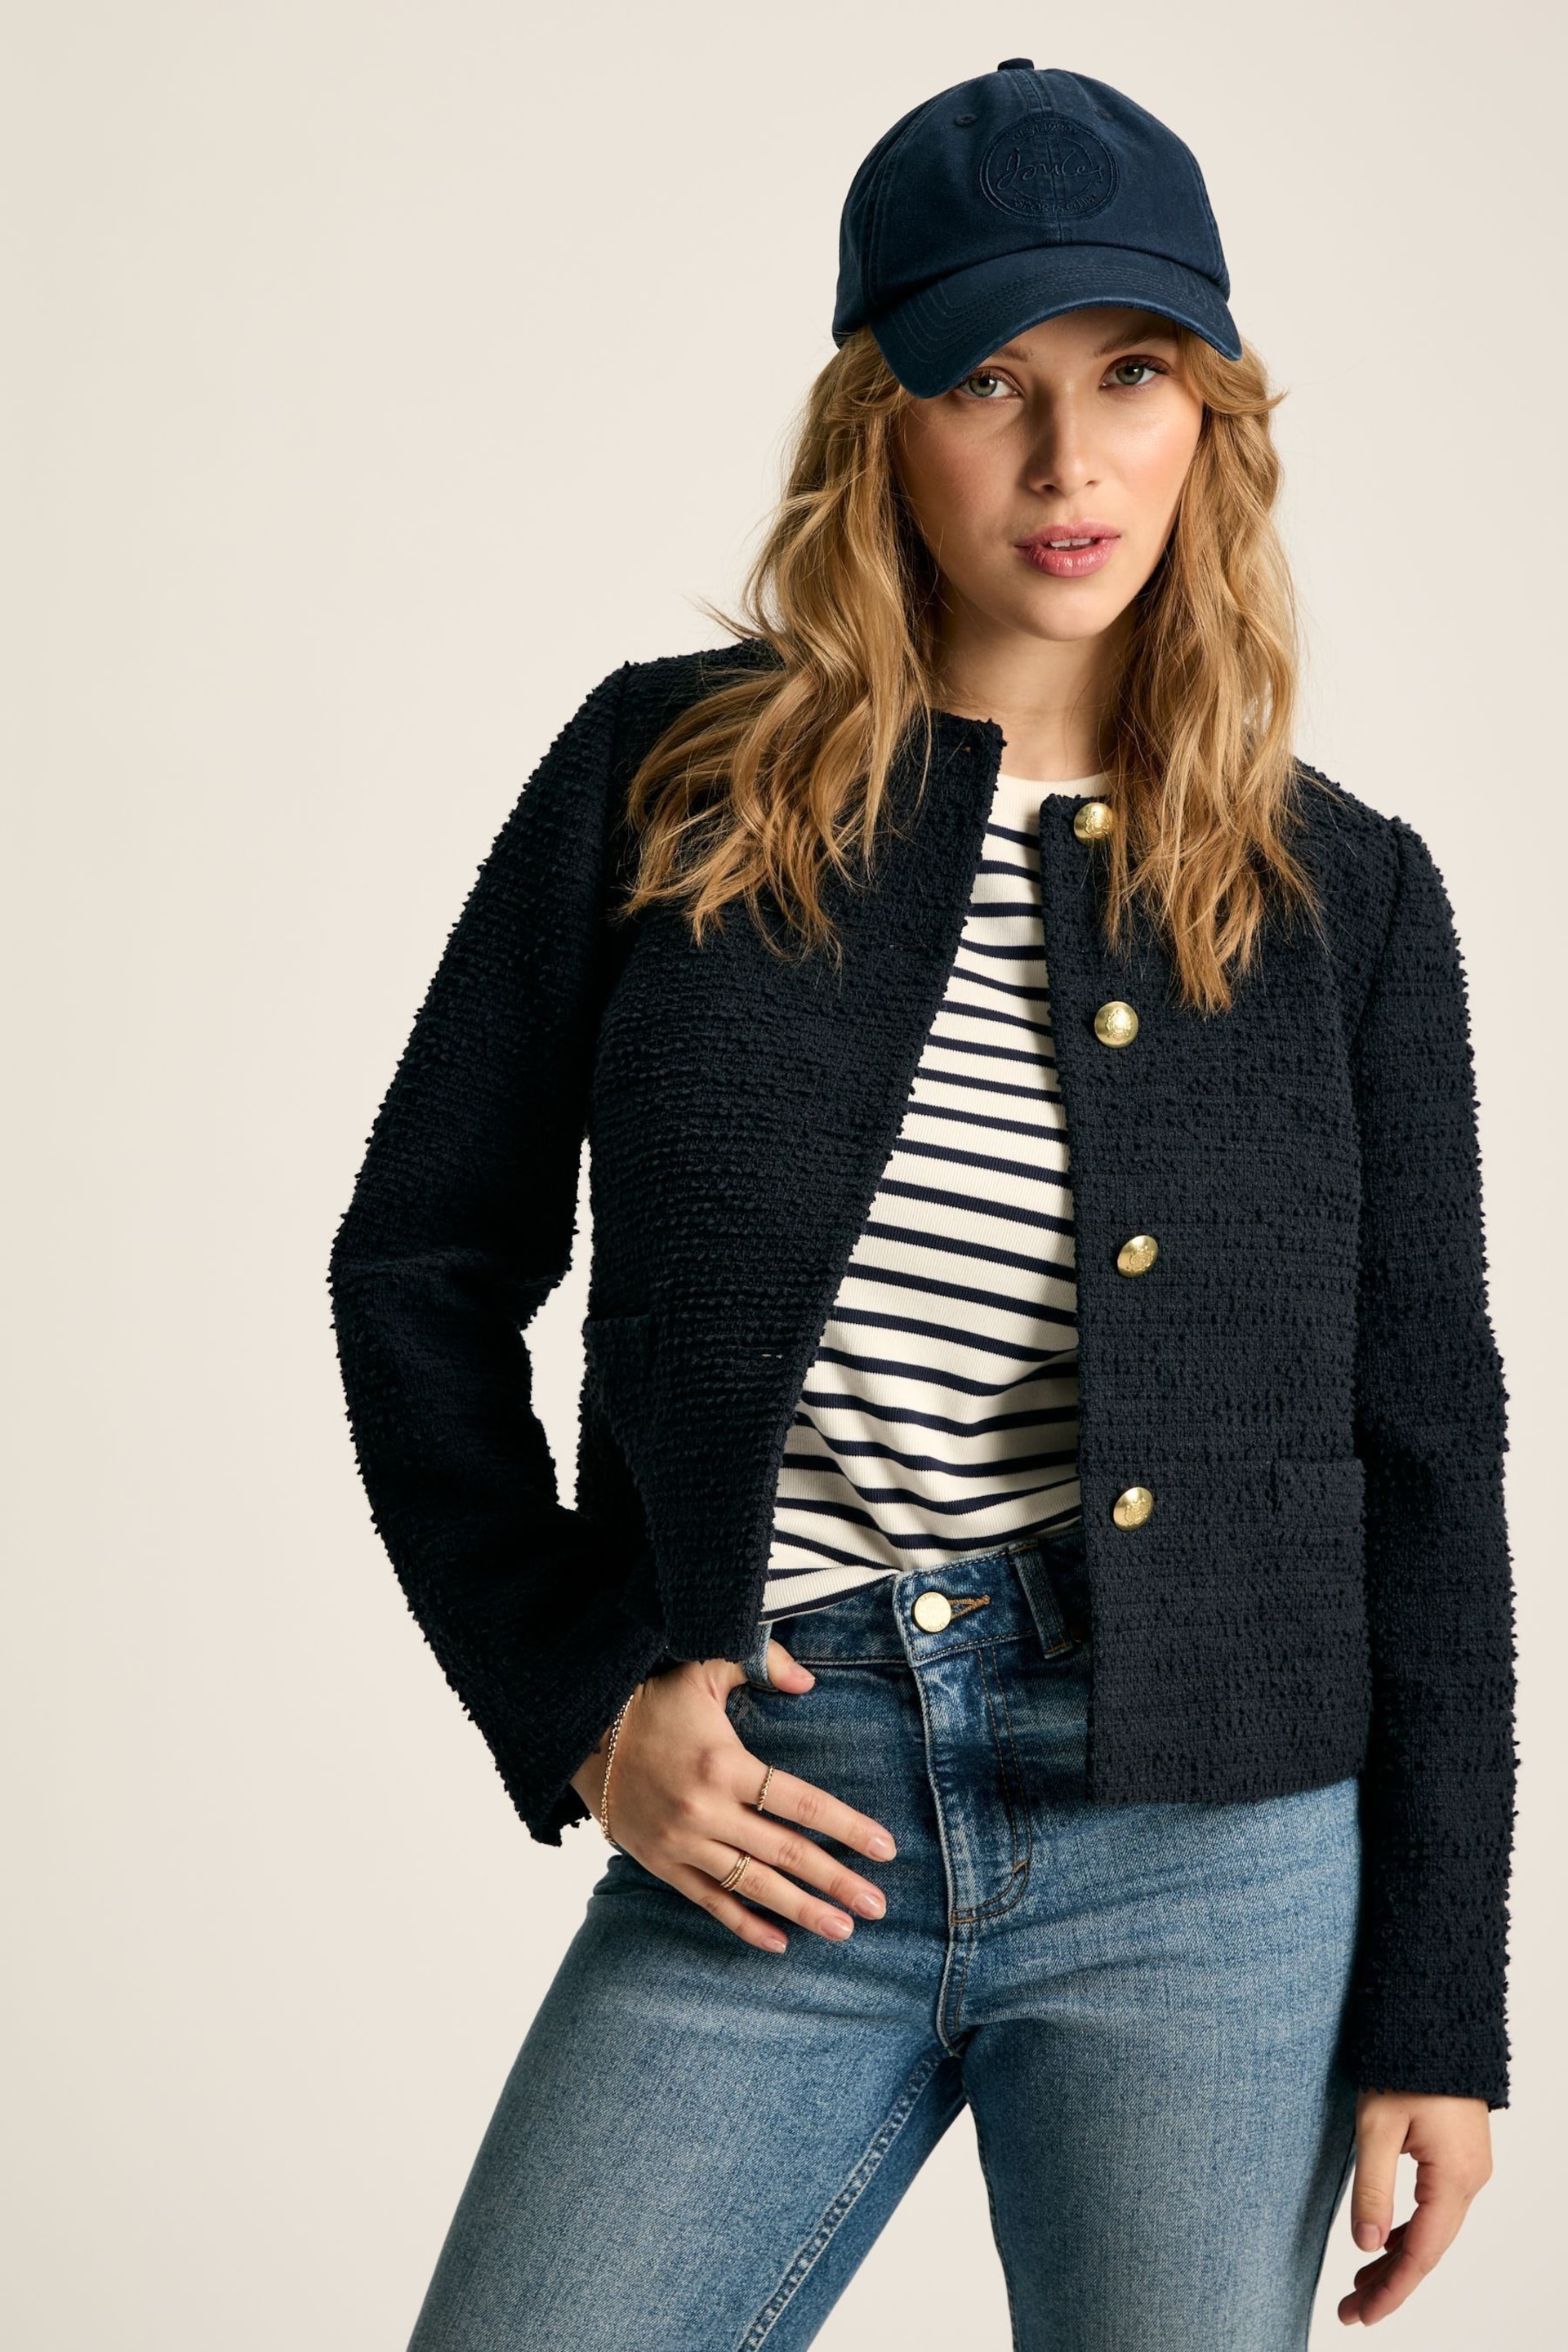 Joules Hampstead Navy Boucle Jacket - Image 3 of 6